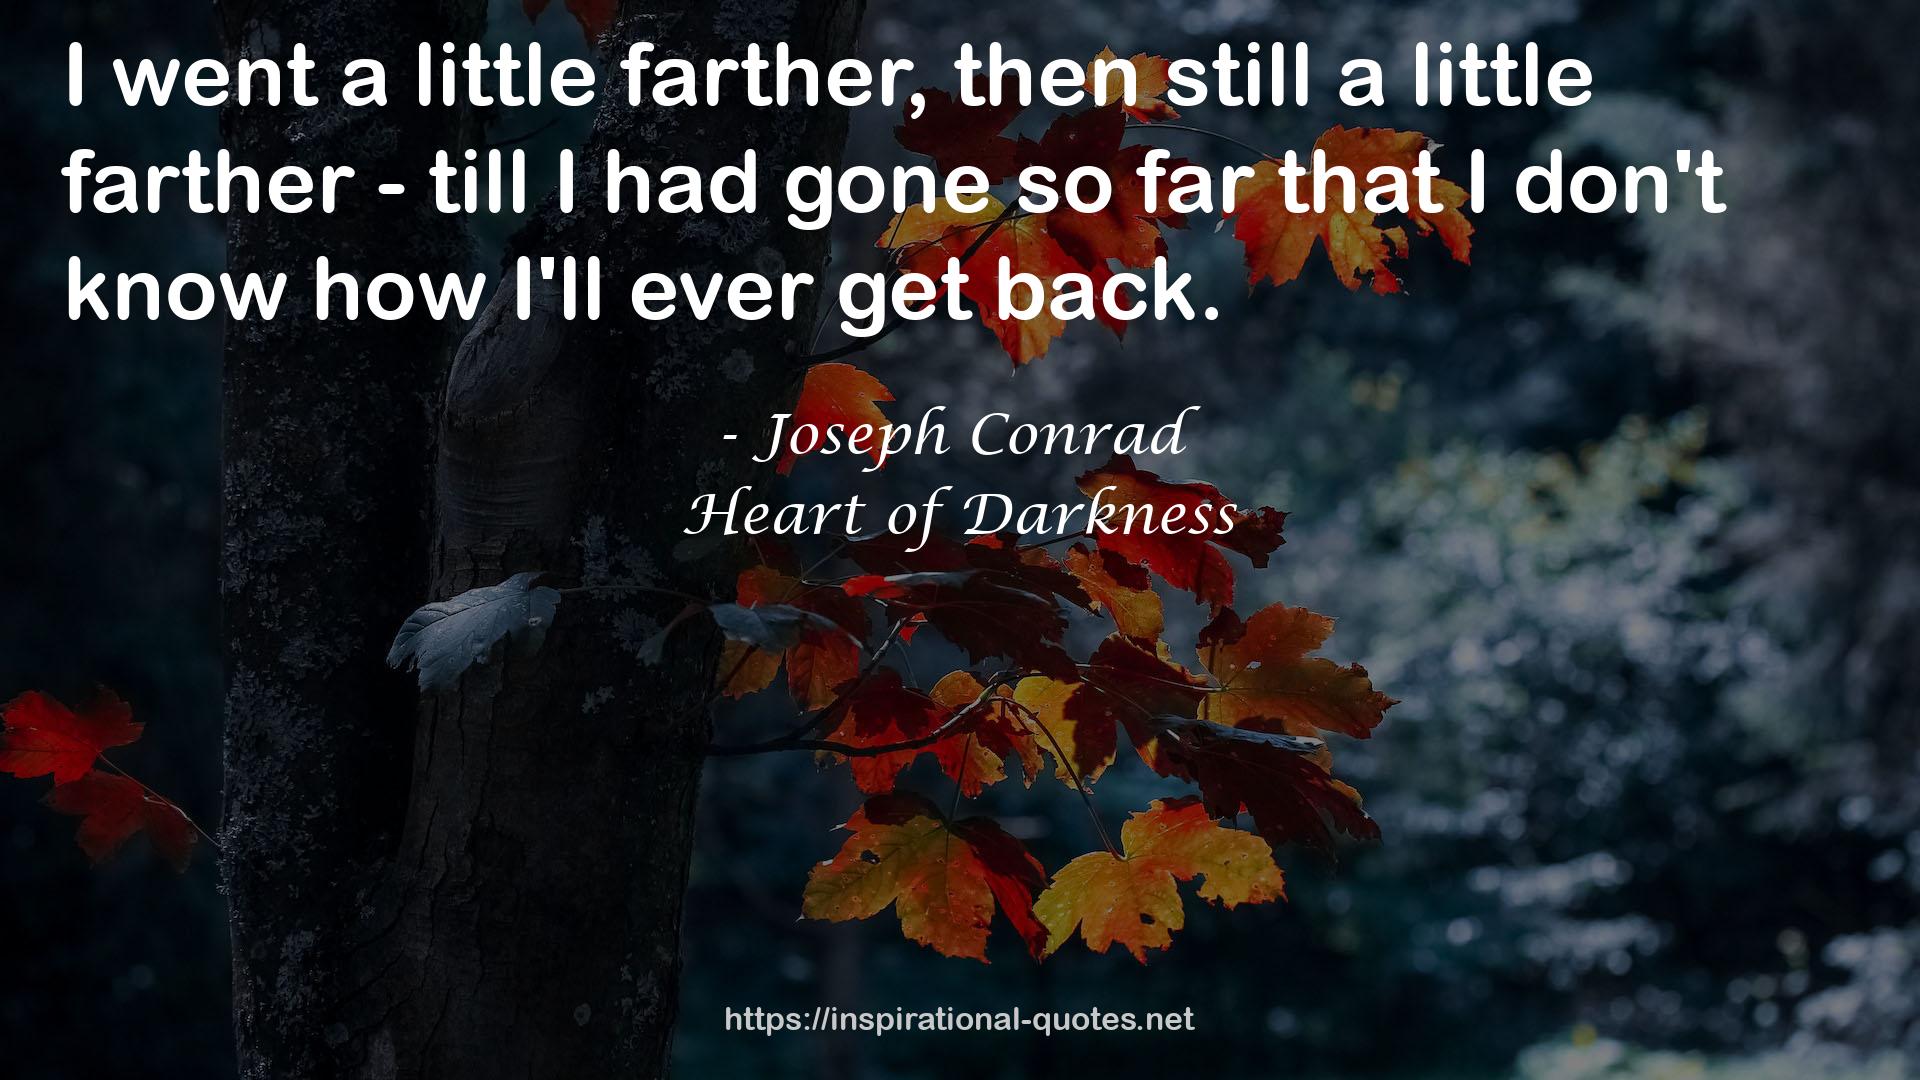 Heart of Darkness QUOTES